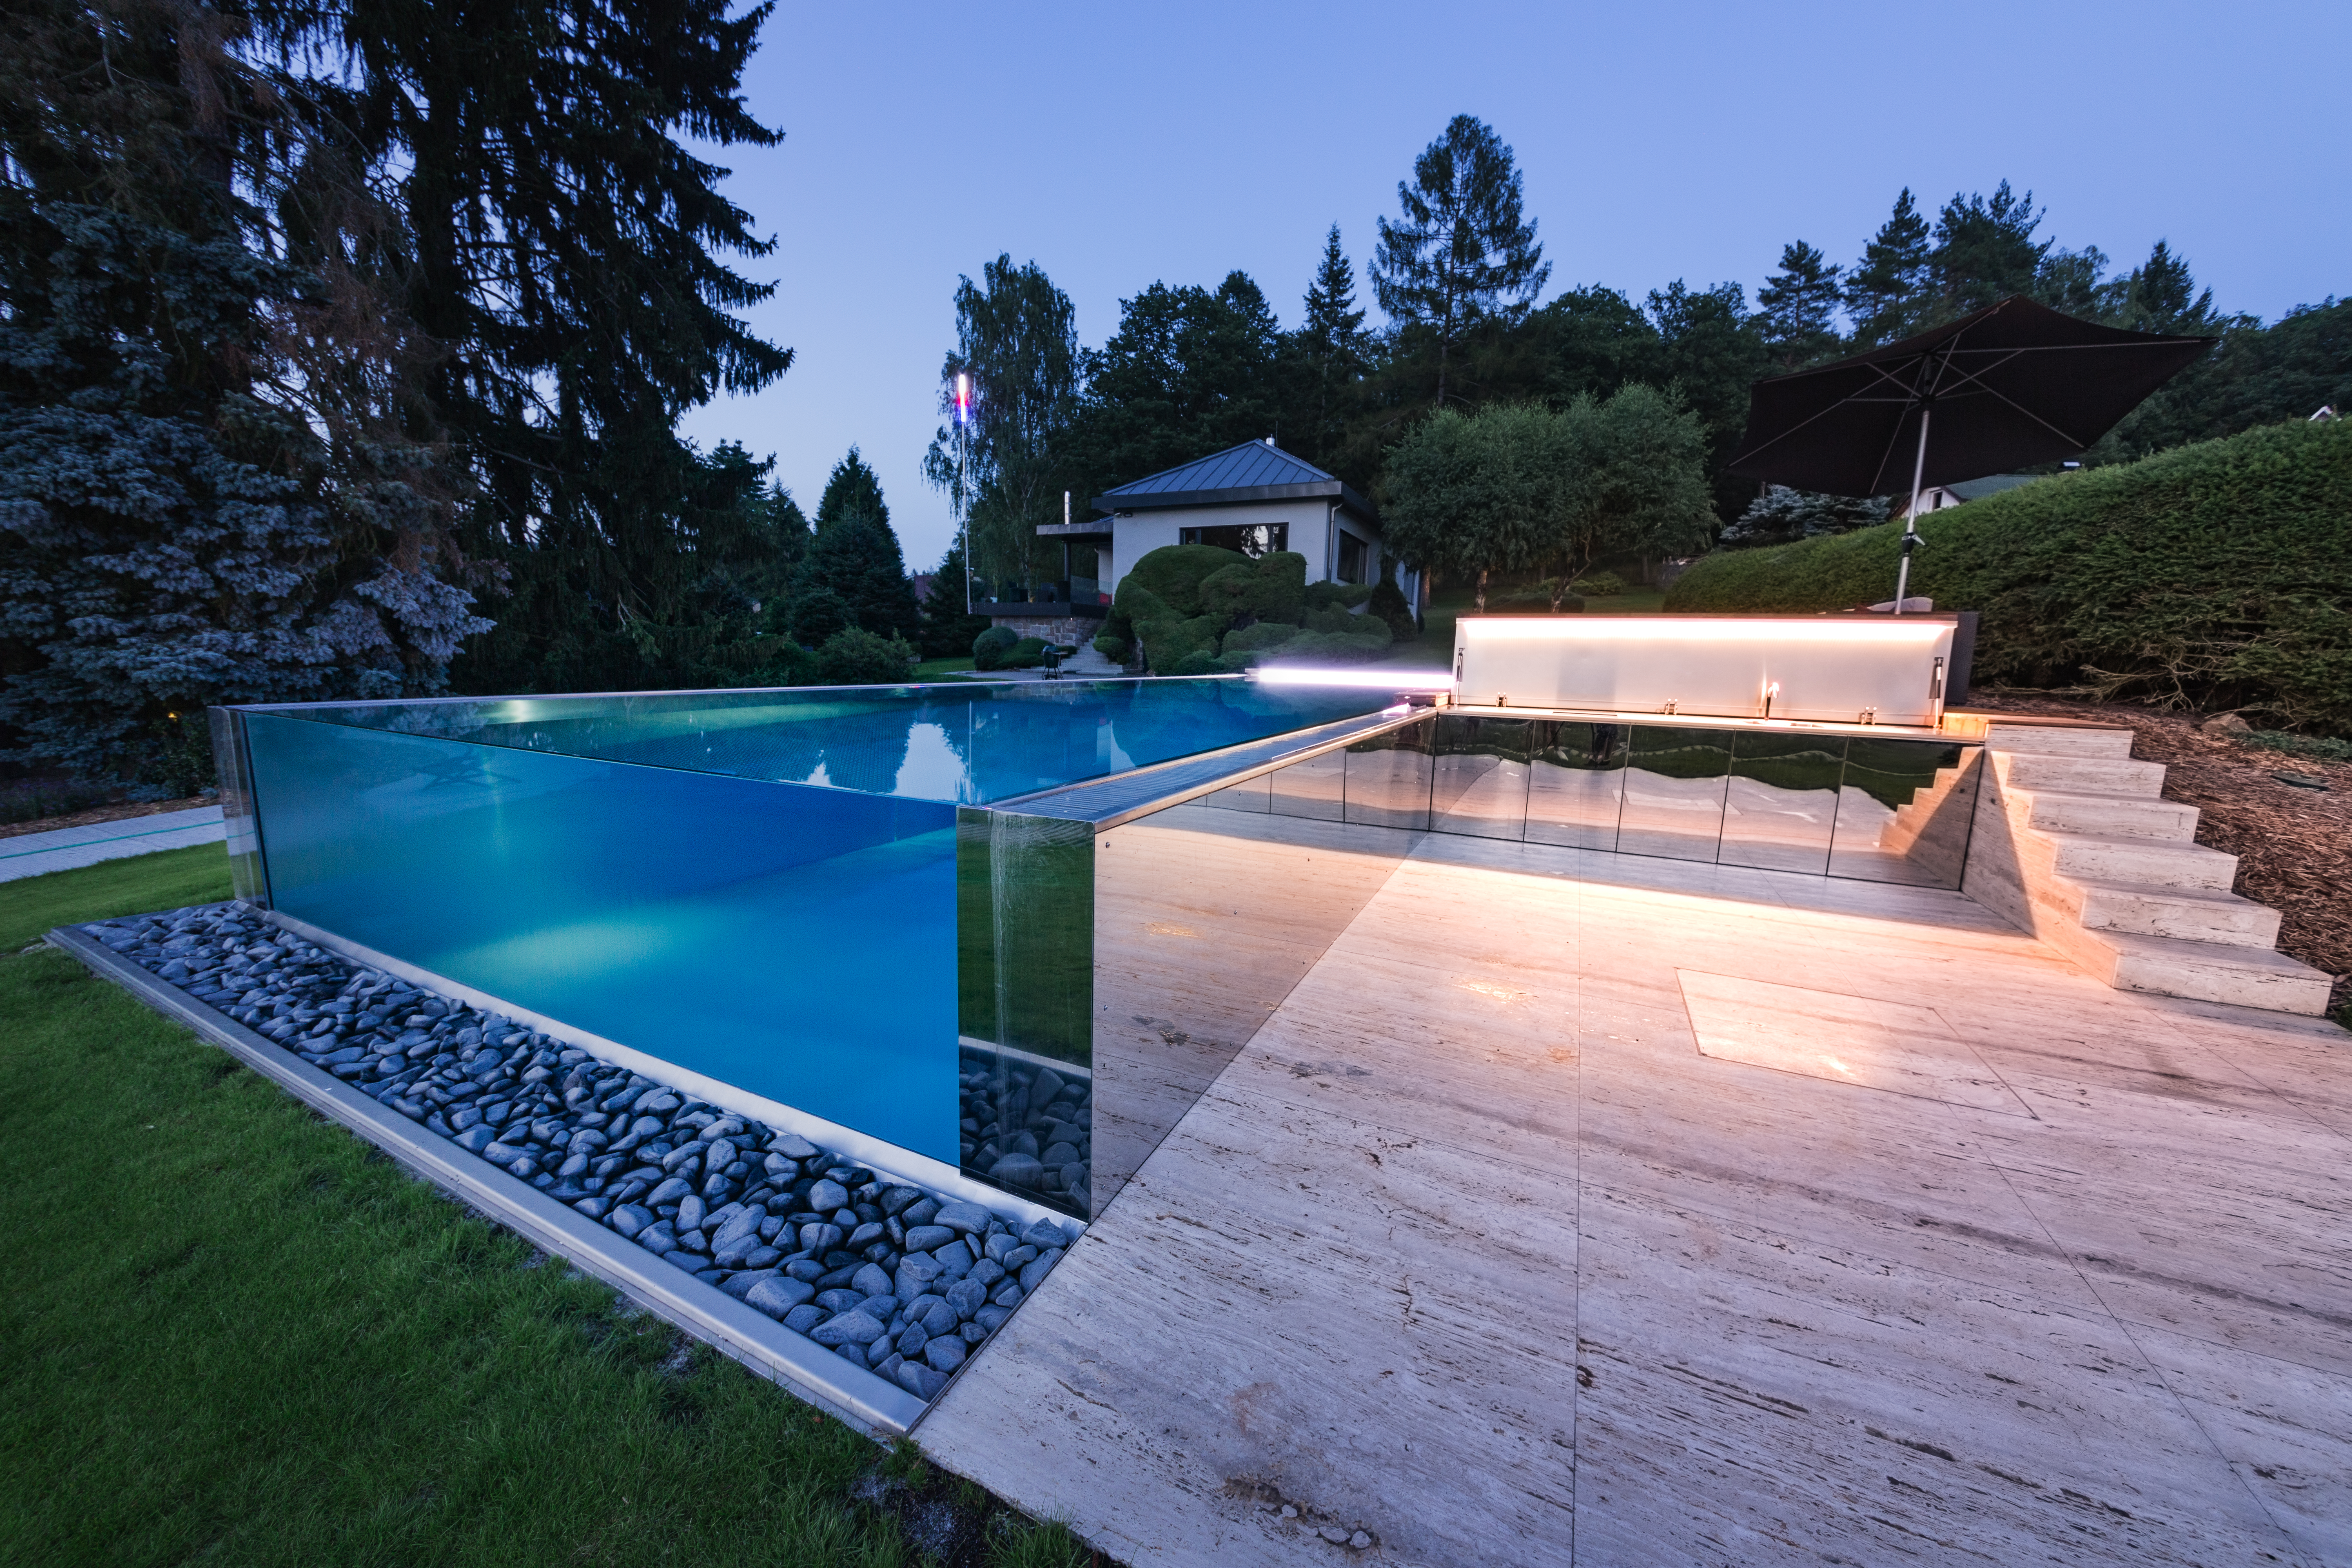 Glass as a unique design accessory that raises the pool to a higher visual level | IMAGINOX GROUP